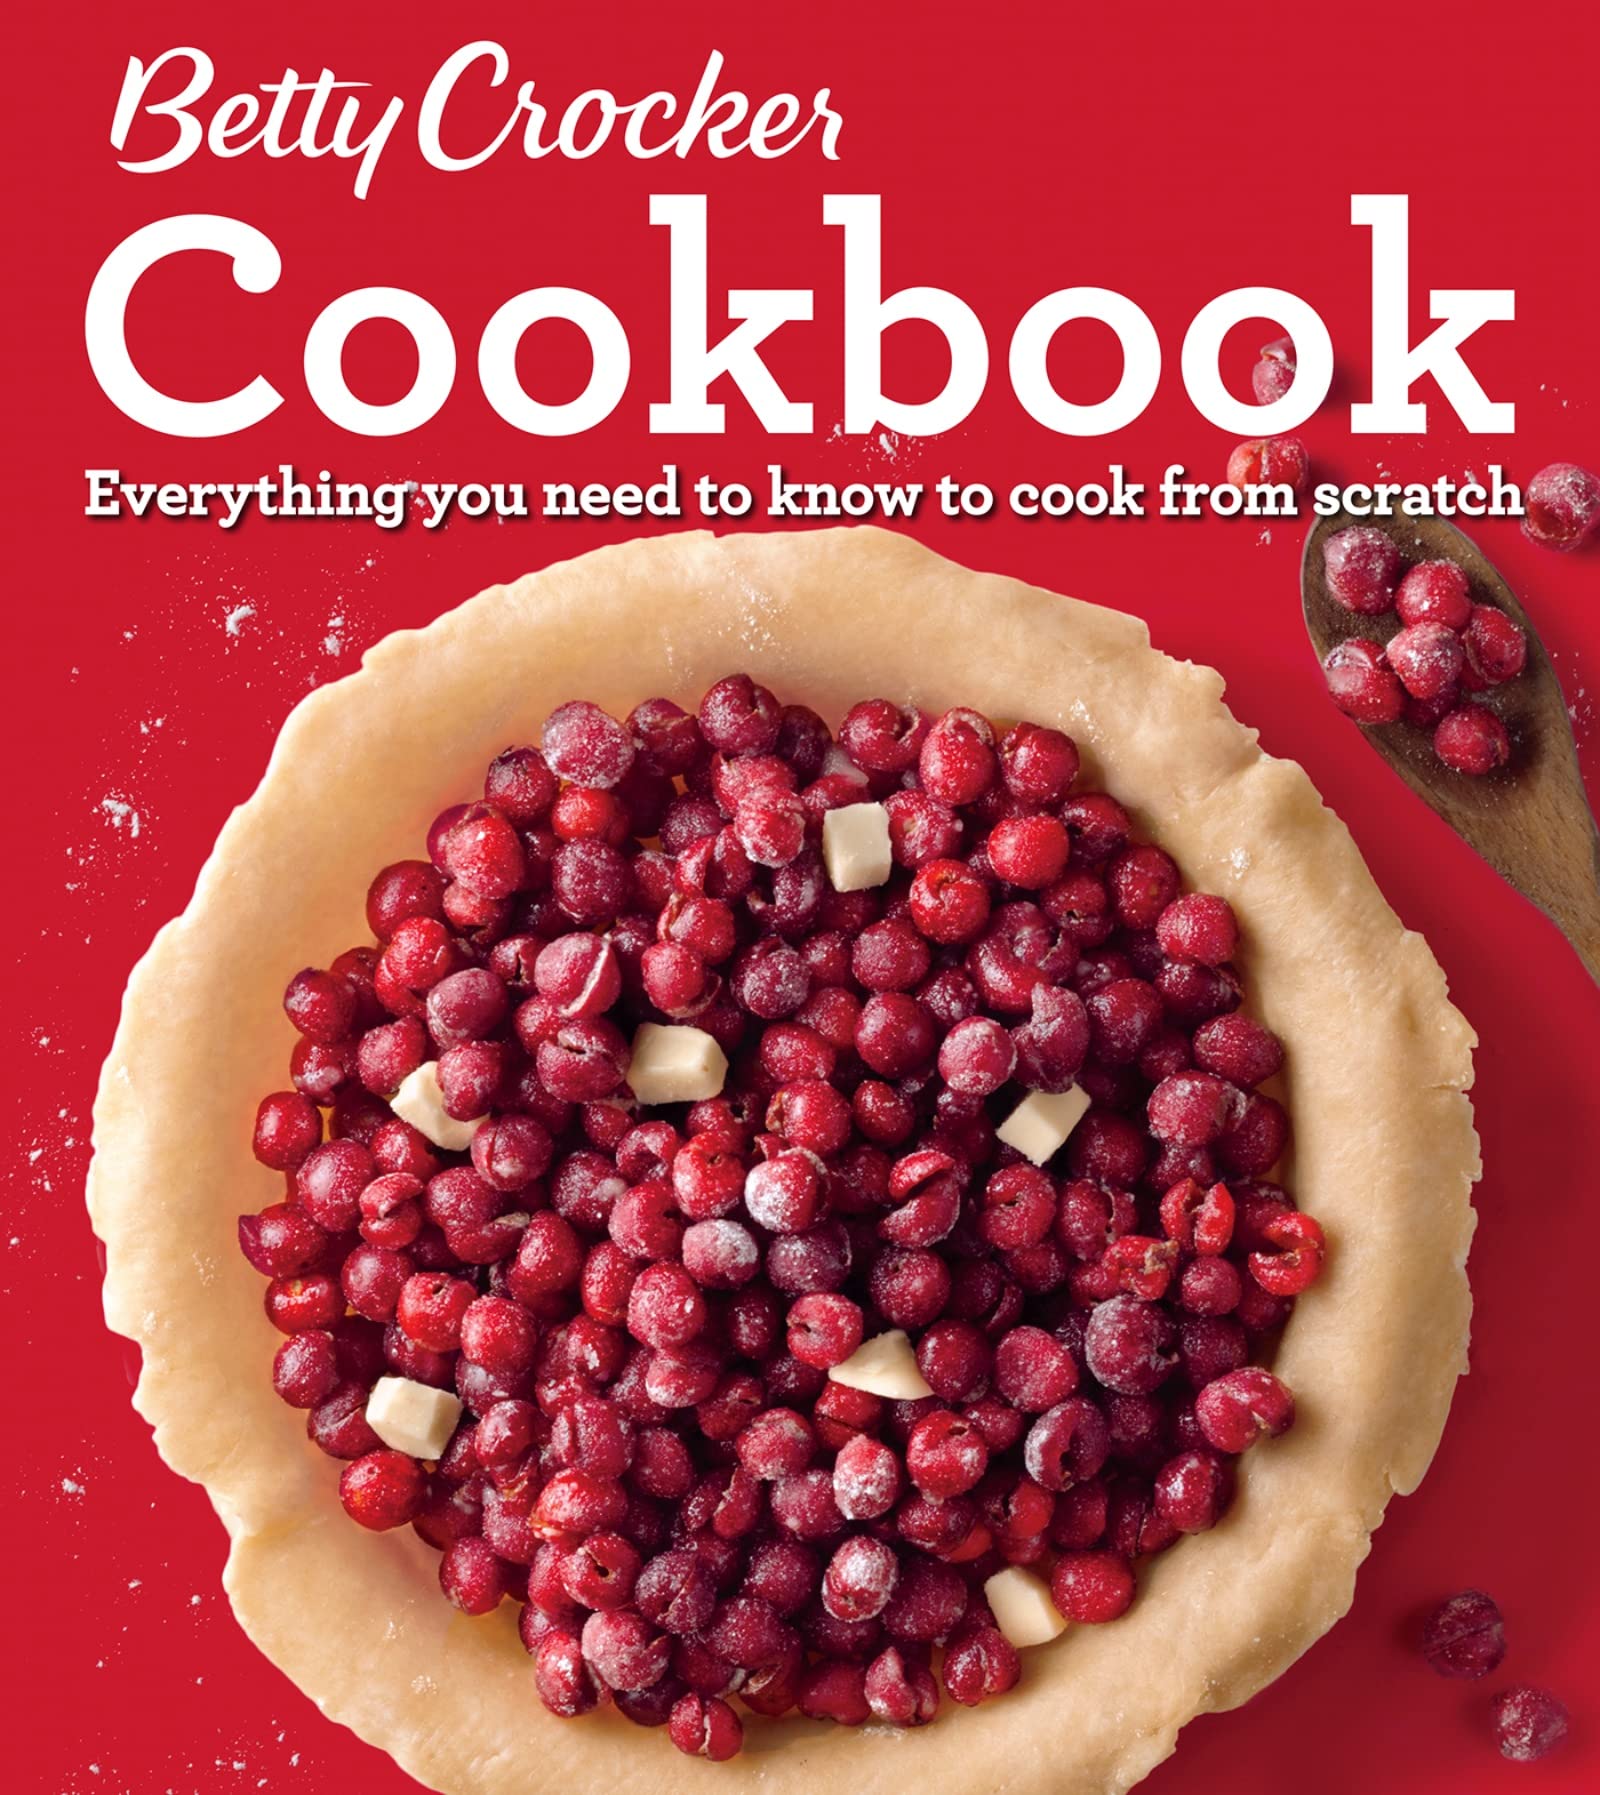 Betty Crocker Cookbook, 12th Edition: Everything You Need to Know to Cook from Scratch (Betty Crocker's Cookbook)